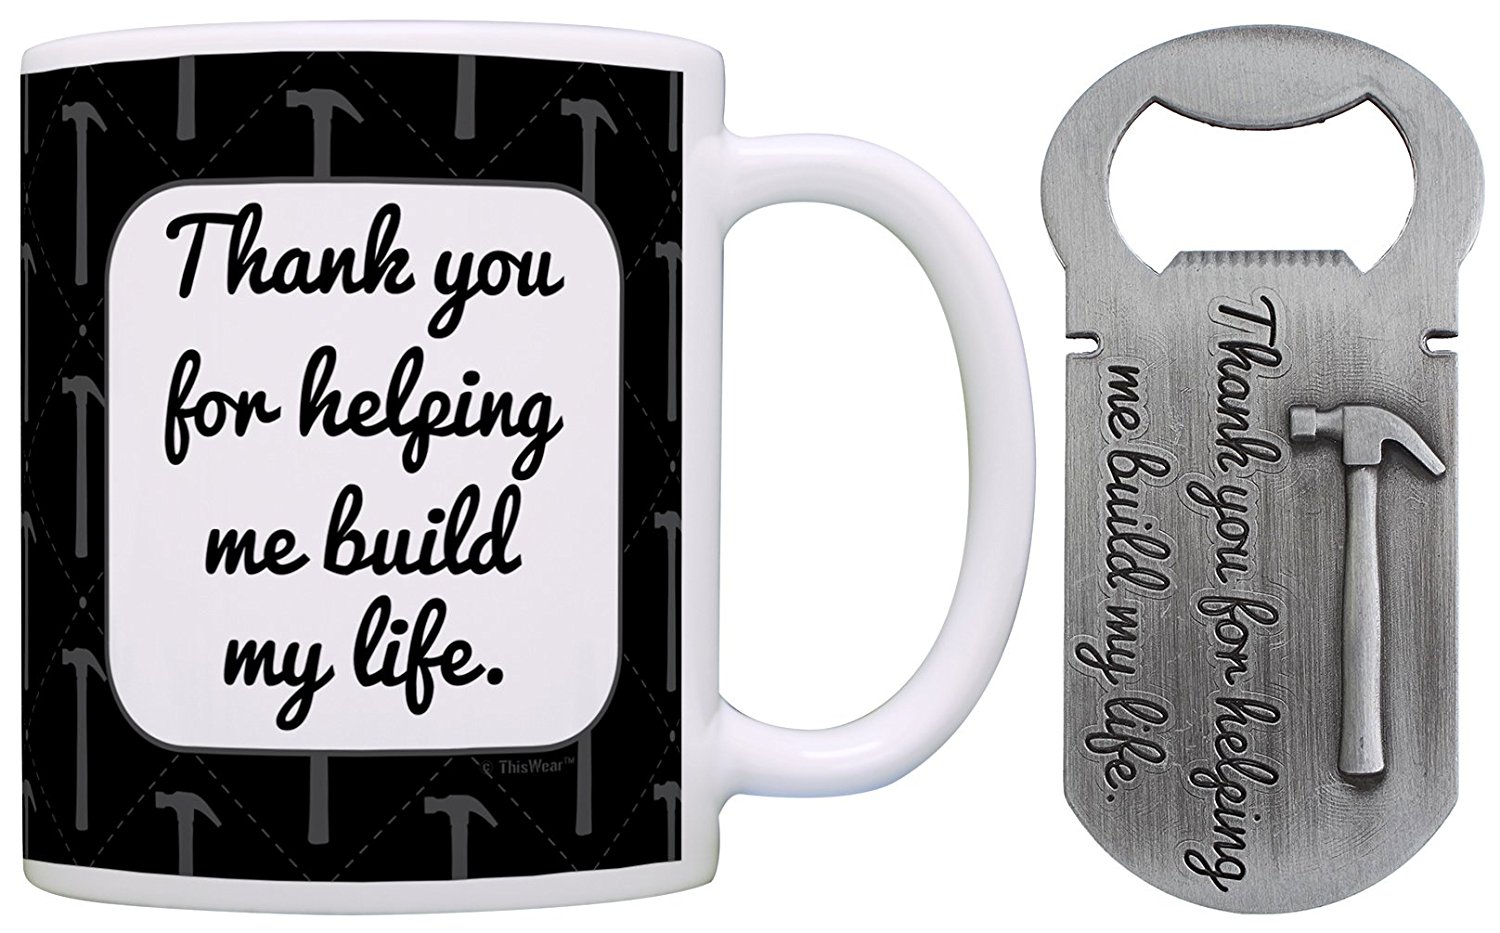 Christmas Gifts for Dad Grandpa Uncle Thank You for Helping Me Build My Life Gift Coffee Mug & Pewter Magnetic Bottle Opener Bundle - image 1 of 7